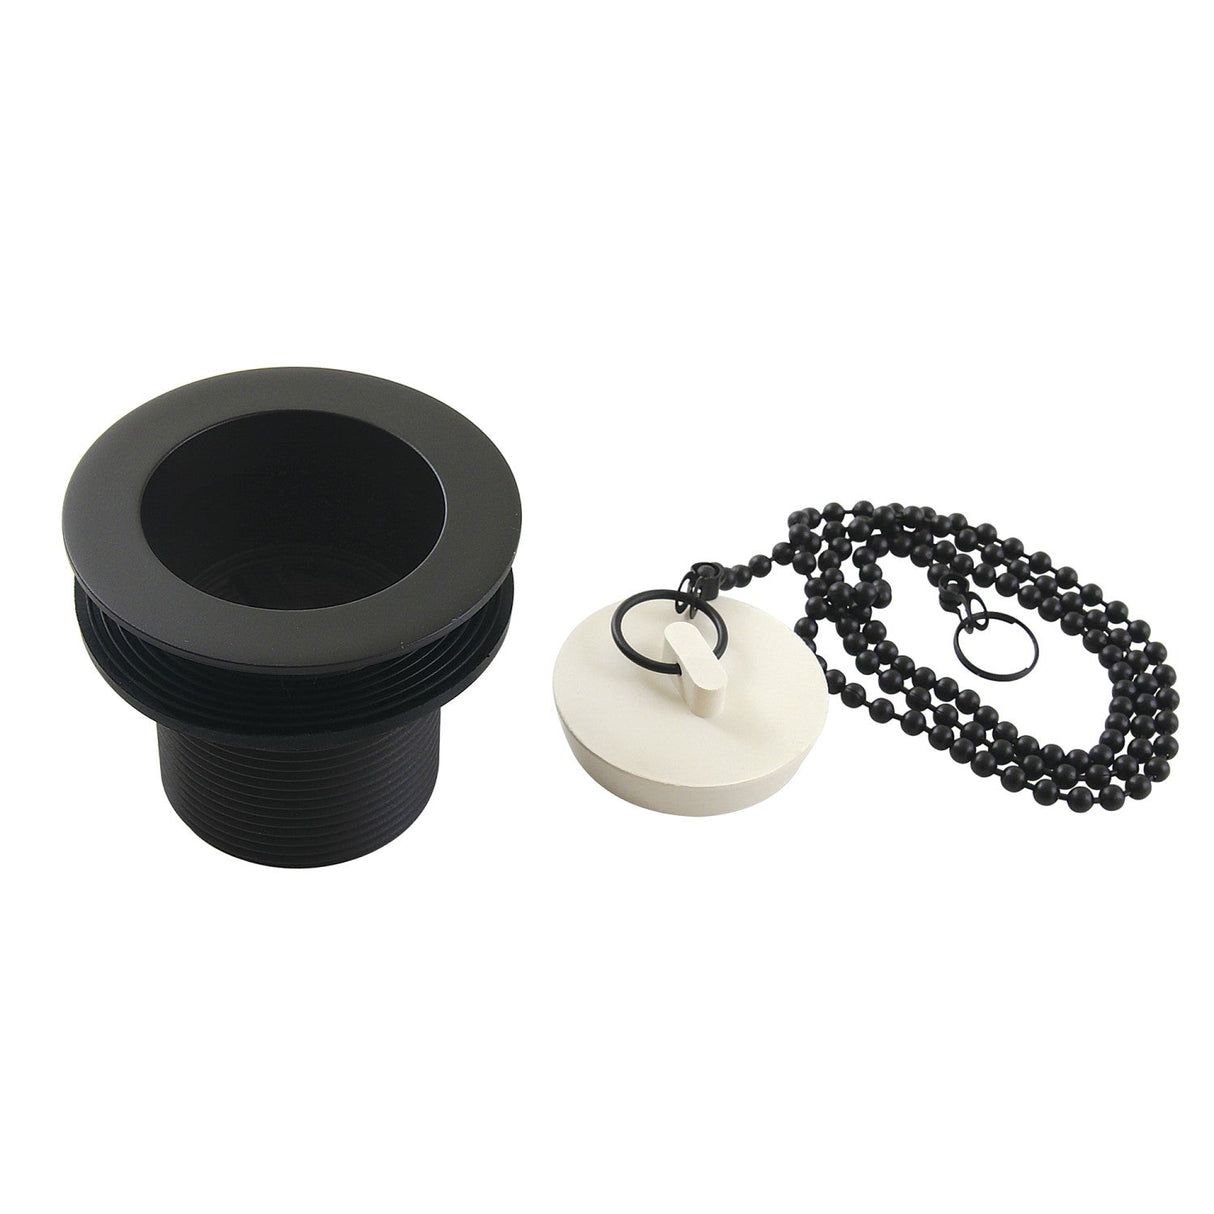 Made To Match DSP17MB 1-1/2-Inch Chain and Stopper Tub Drain with 1-3/4-Inch Body Thread, Matte Black